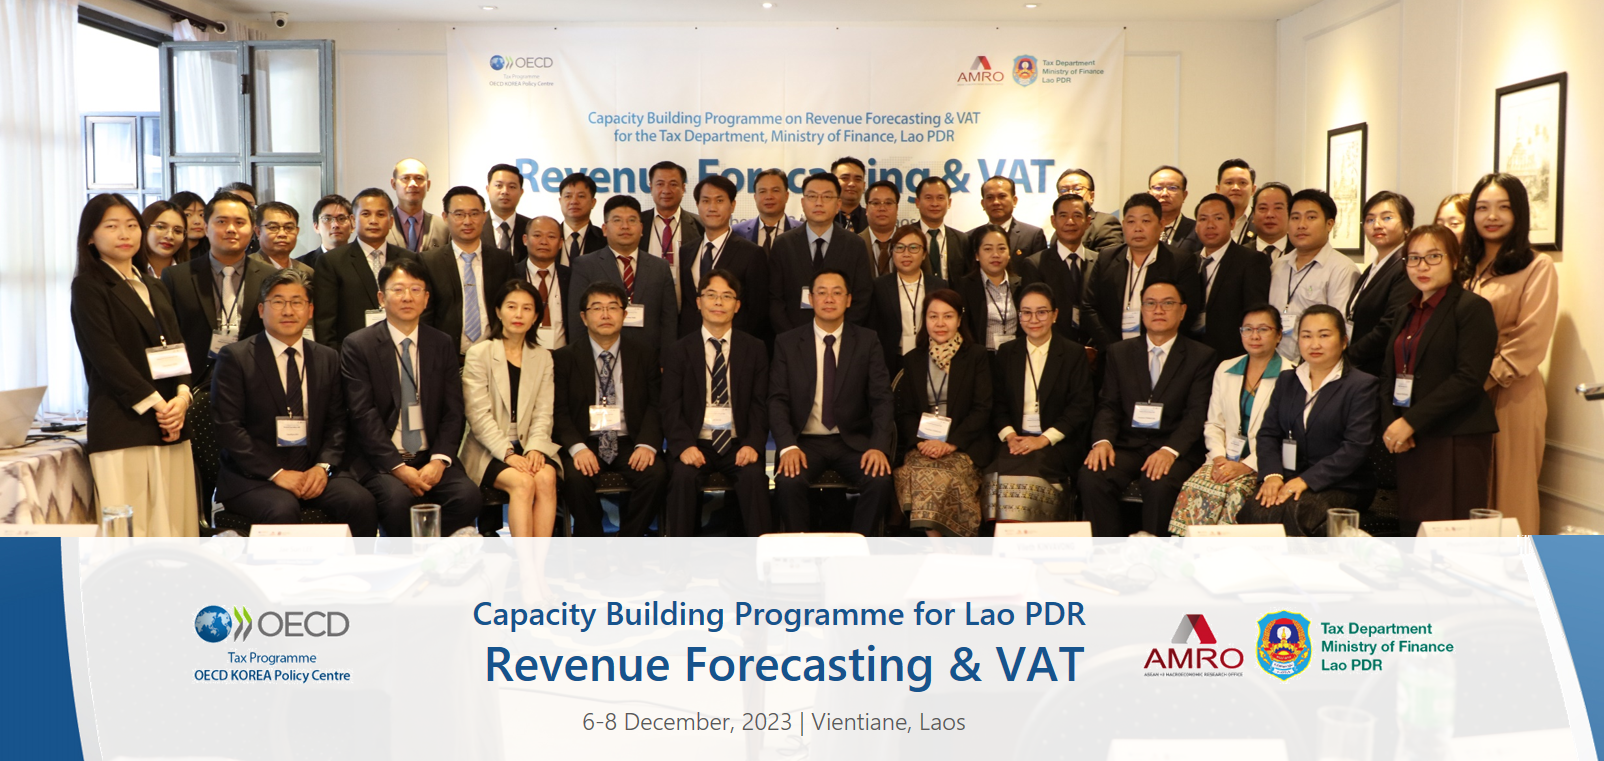 Capacity Building Programme on Revenue Forecasting & VAT for Lao PDR